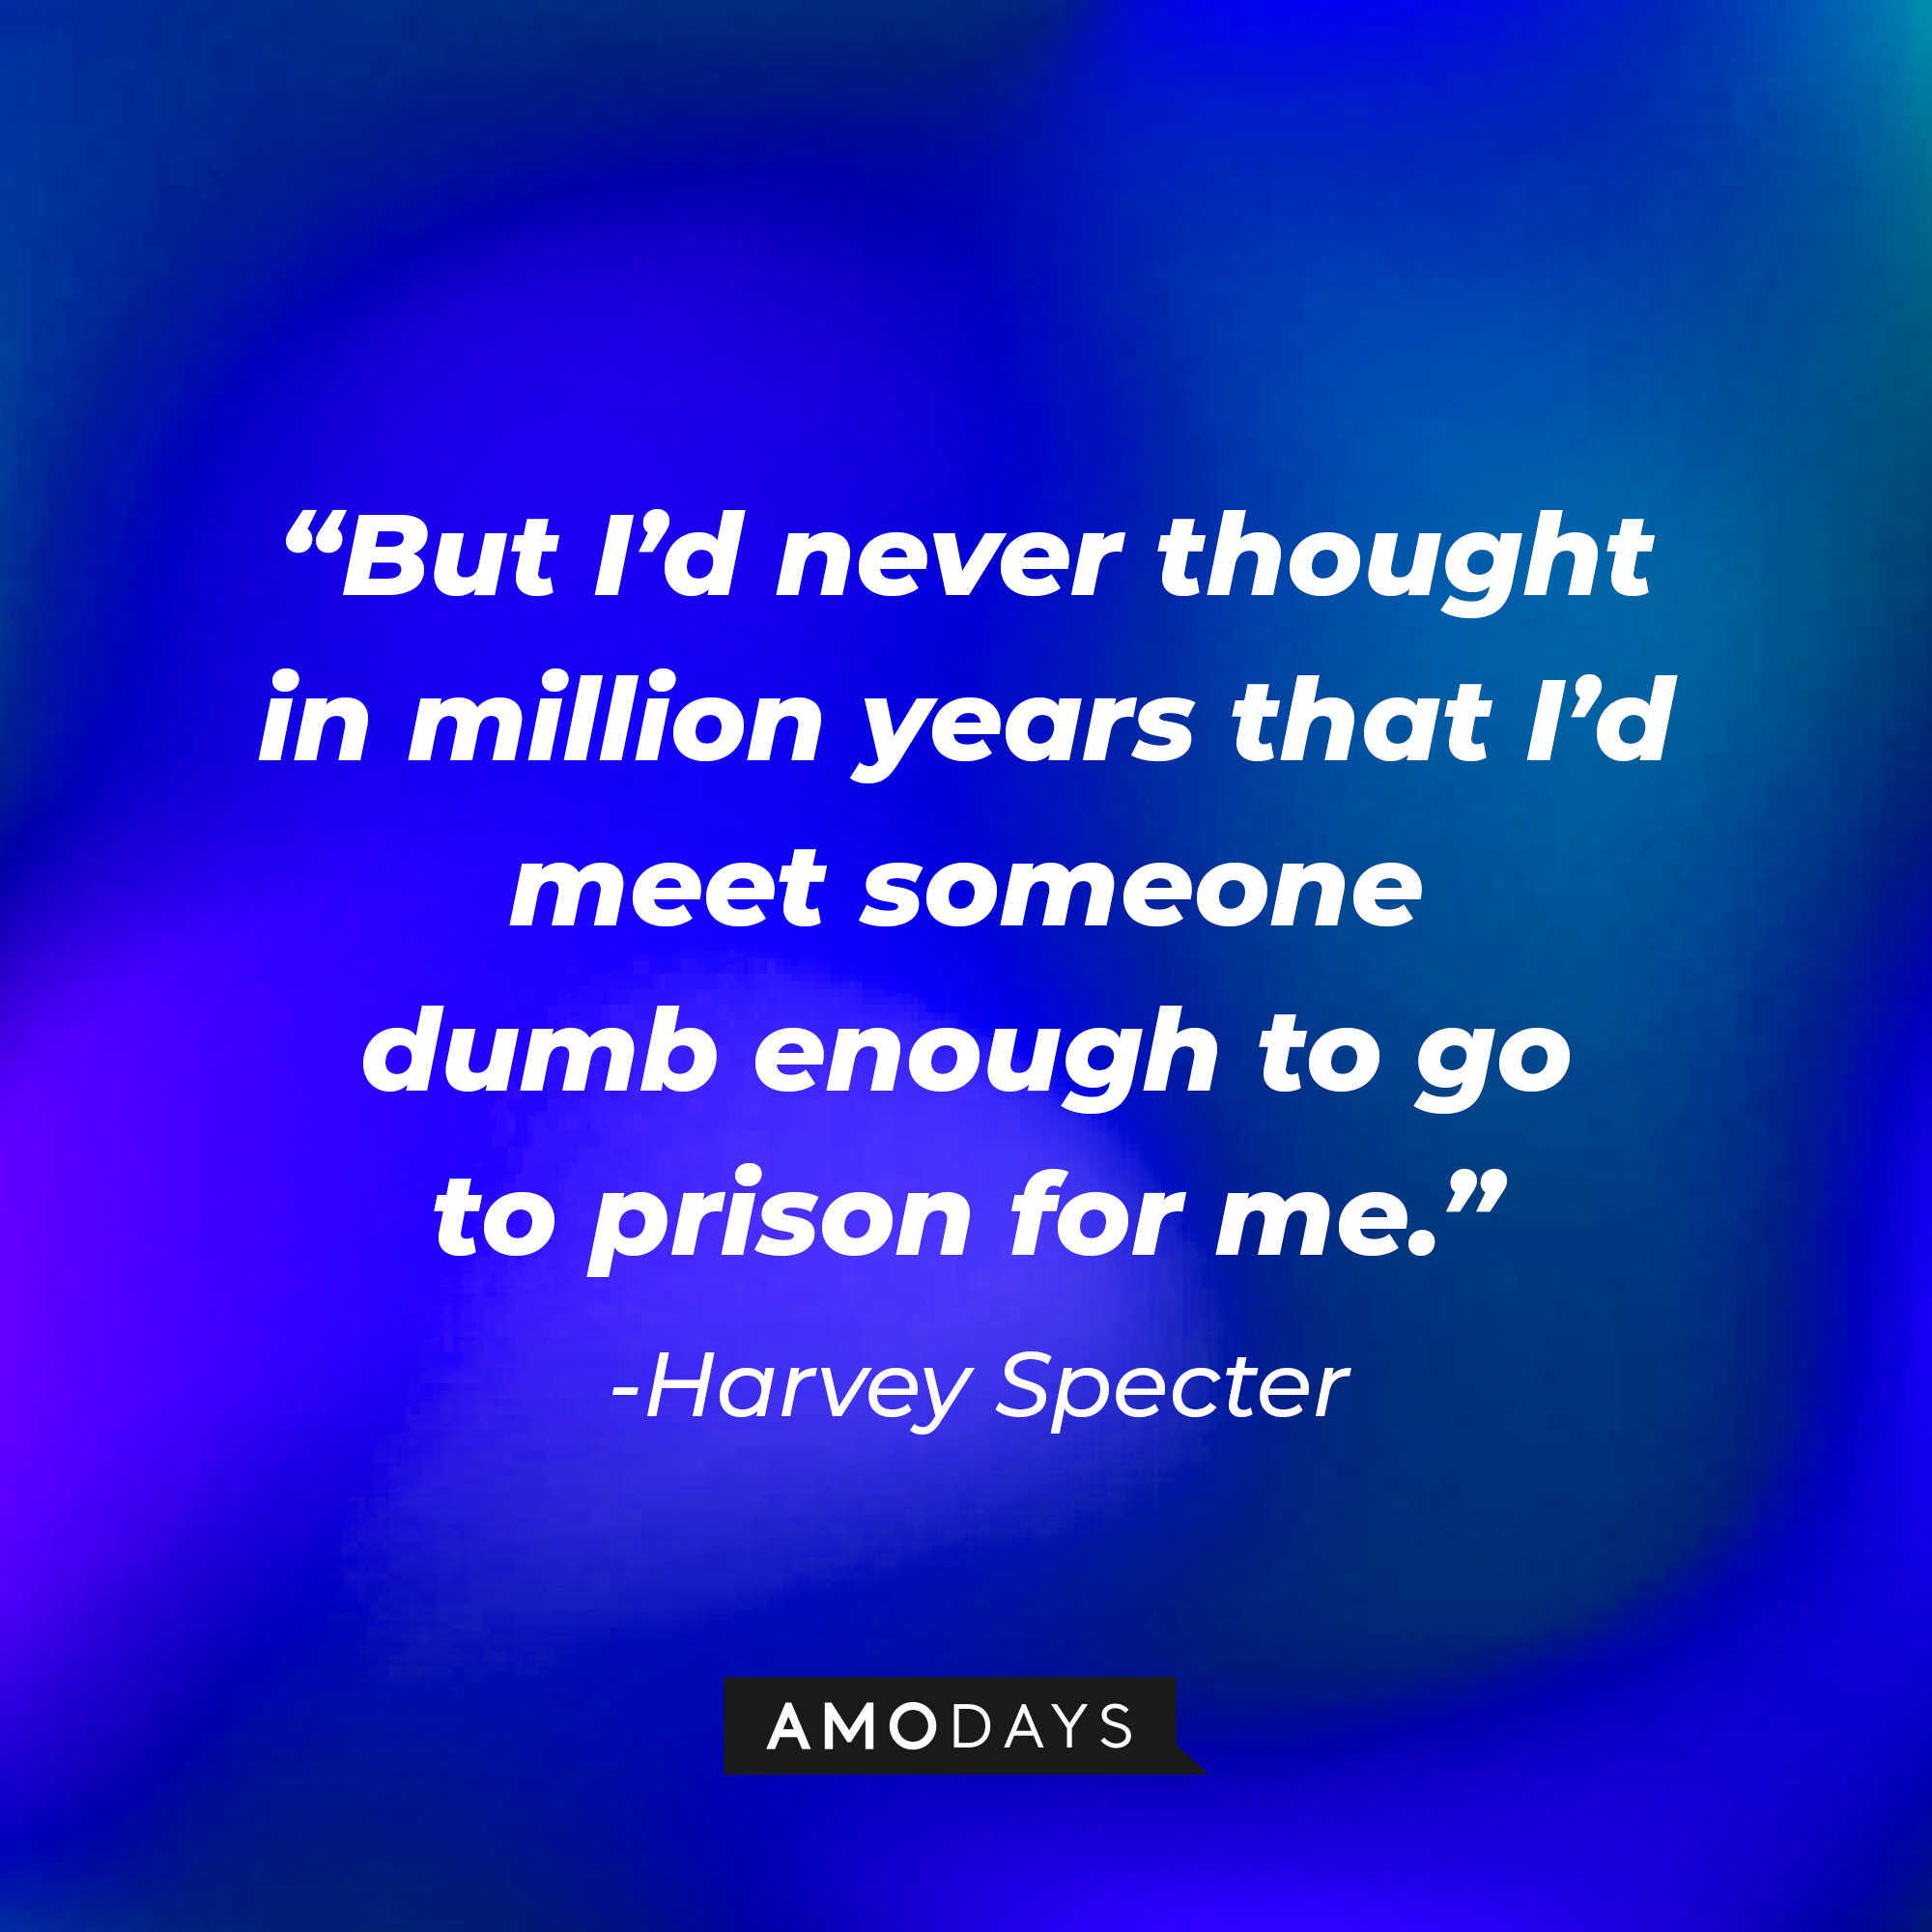 Harvey Specter's quote from "Suits" : "But I'd never thought in million years that I'd meet someone dumb enough to go to prison for me." | Source: Amodays